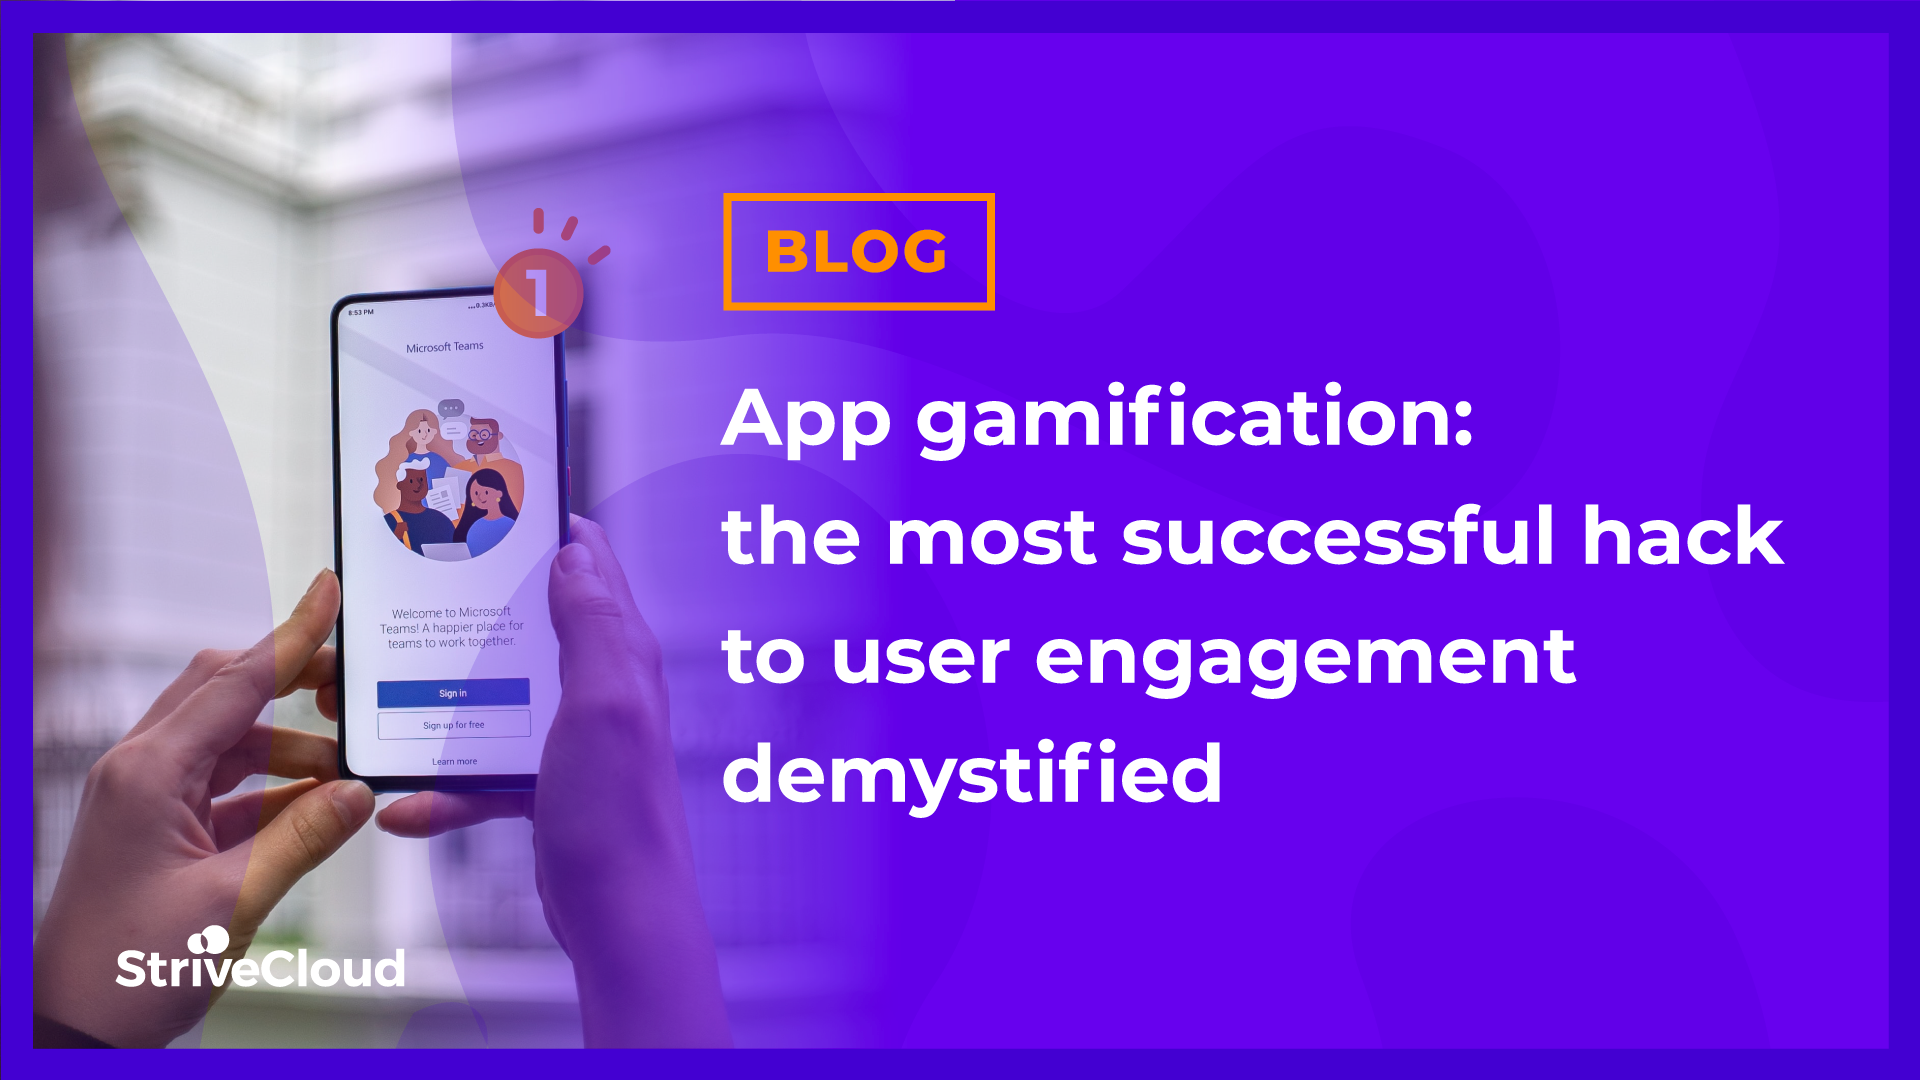 App gamification: The most succesful hack to user engagement demystified